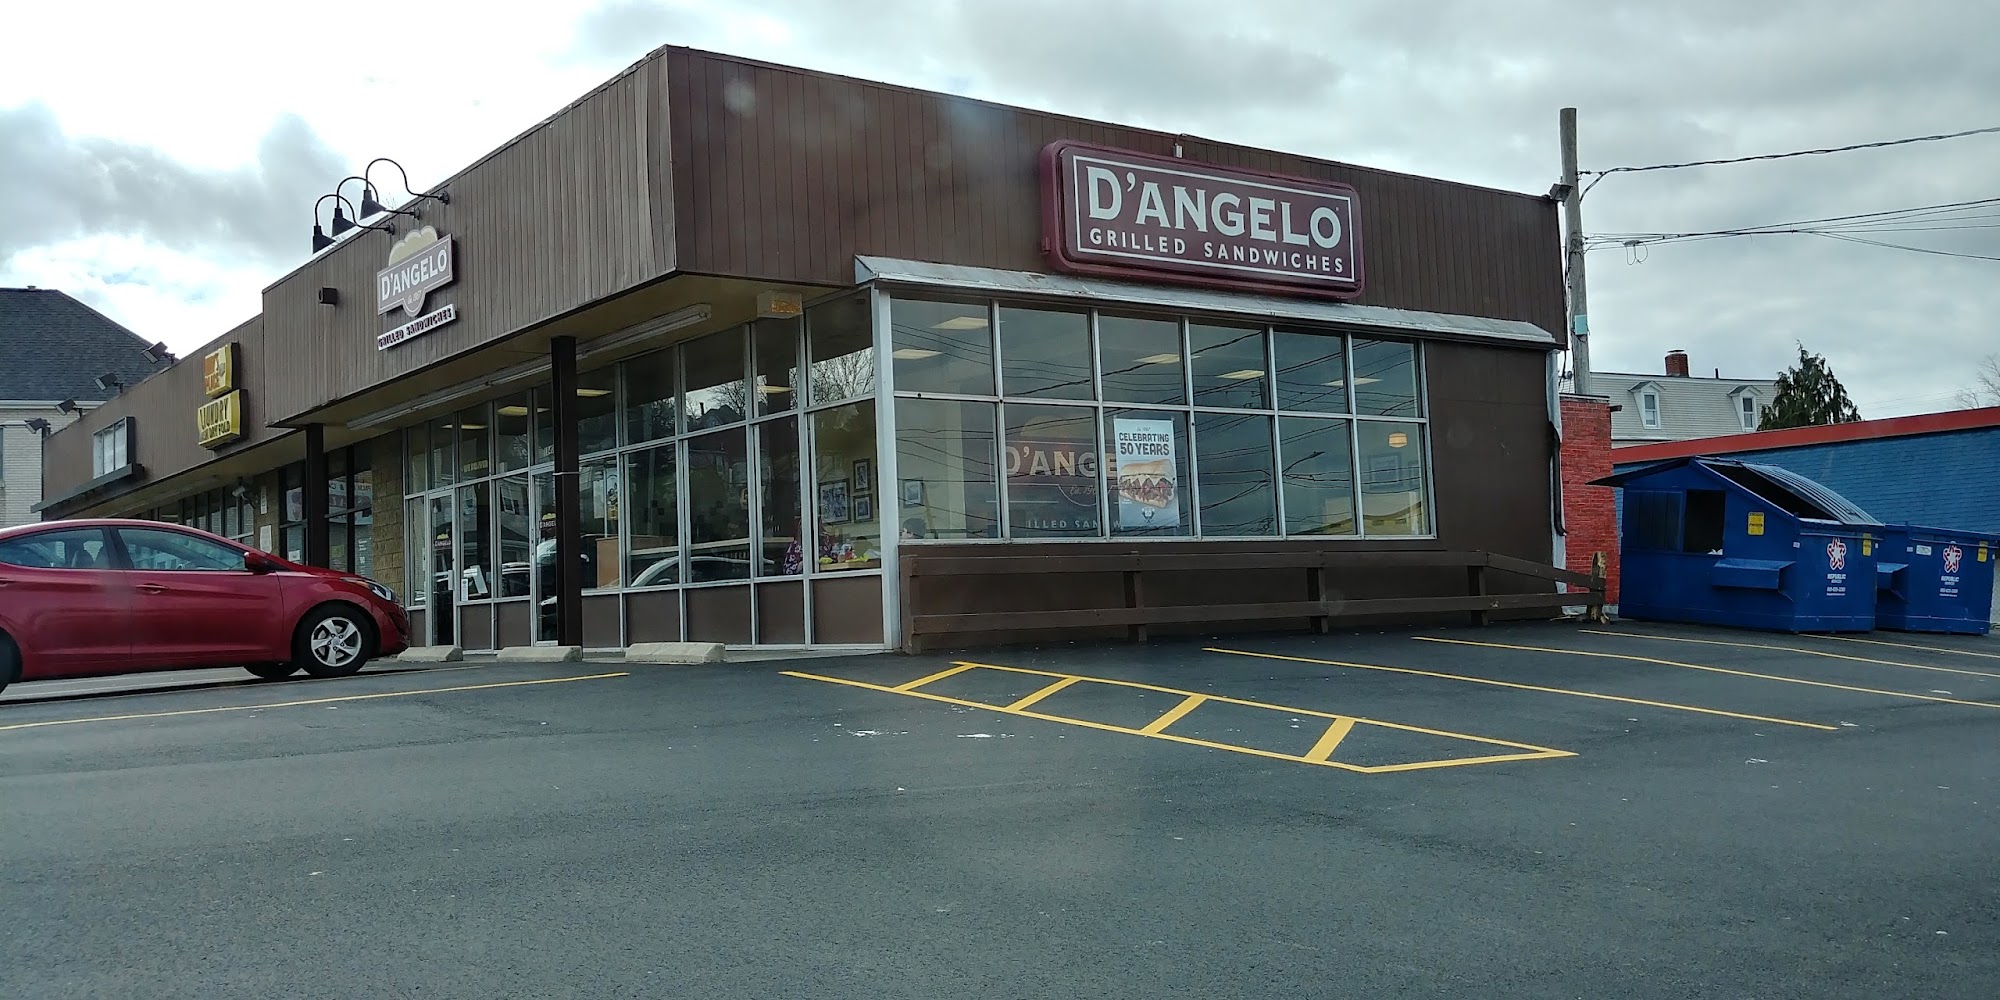 D'Angelo Grilled Sandwiches